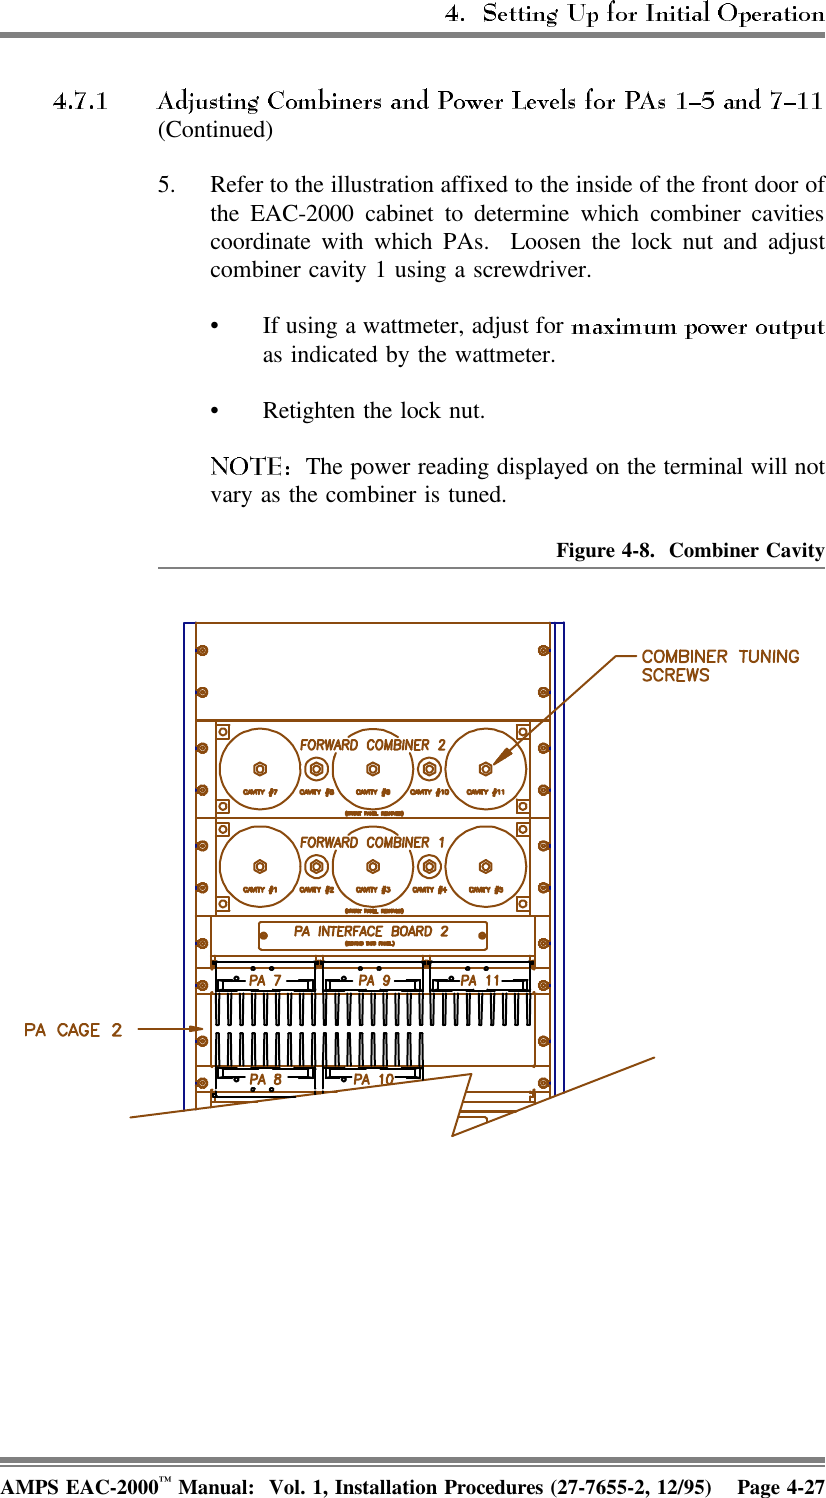 (Continued)5. Refer to the illustration affixed to the inside of the front door ofthe EAC-2000 cabinet to determine which combiner cavitiescoordinate with which PAs.  Loosen the lock nut and adjustcombiner cavity 1 using a screwdriver.• If using a wattmeter, adjust for as indicated by the wattmeter.• Retighten the lock nut.  The power reading displayed on the terminal will notvary as the combiner is tuned.Figure 4-8. Combiner CavityAMPS EAC-2000™ Manual:  Vol. 1, Installation Procedures (27-7655-2, 12/95) Page 4-27